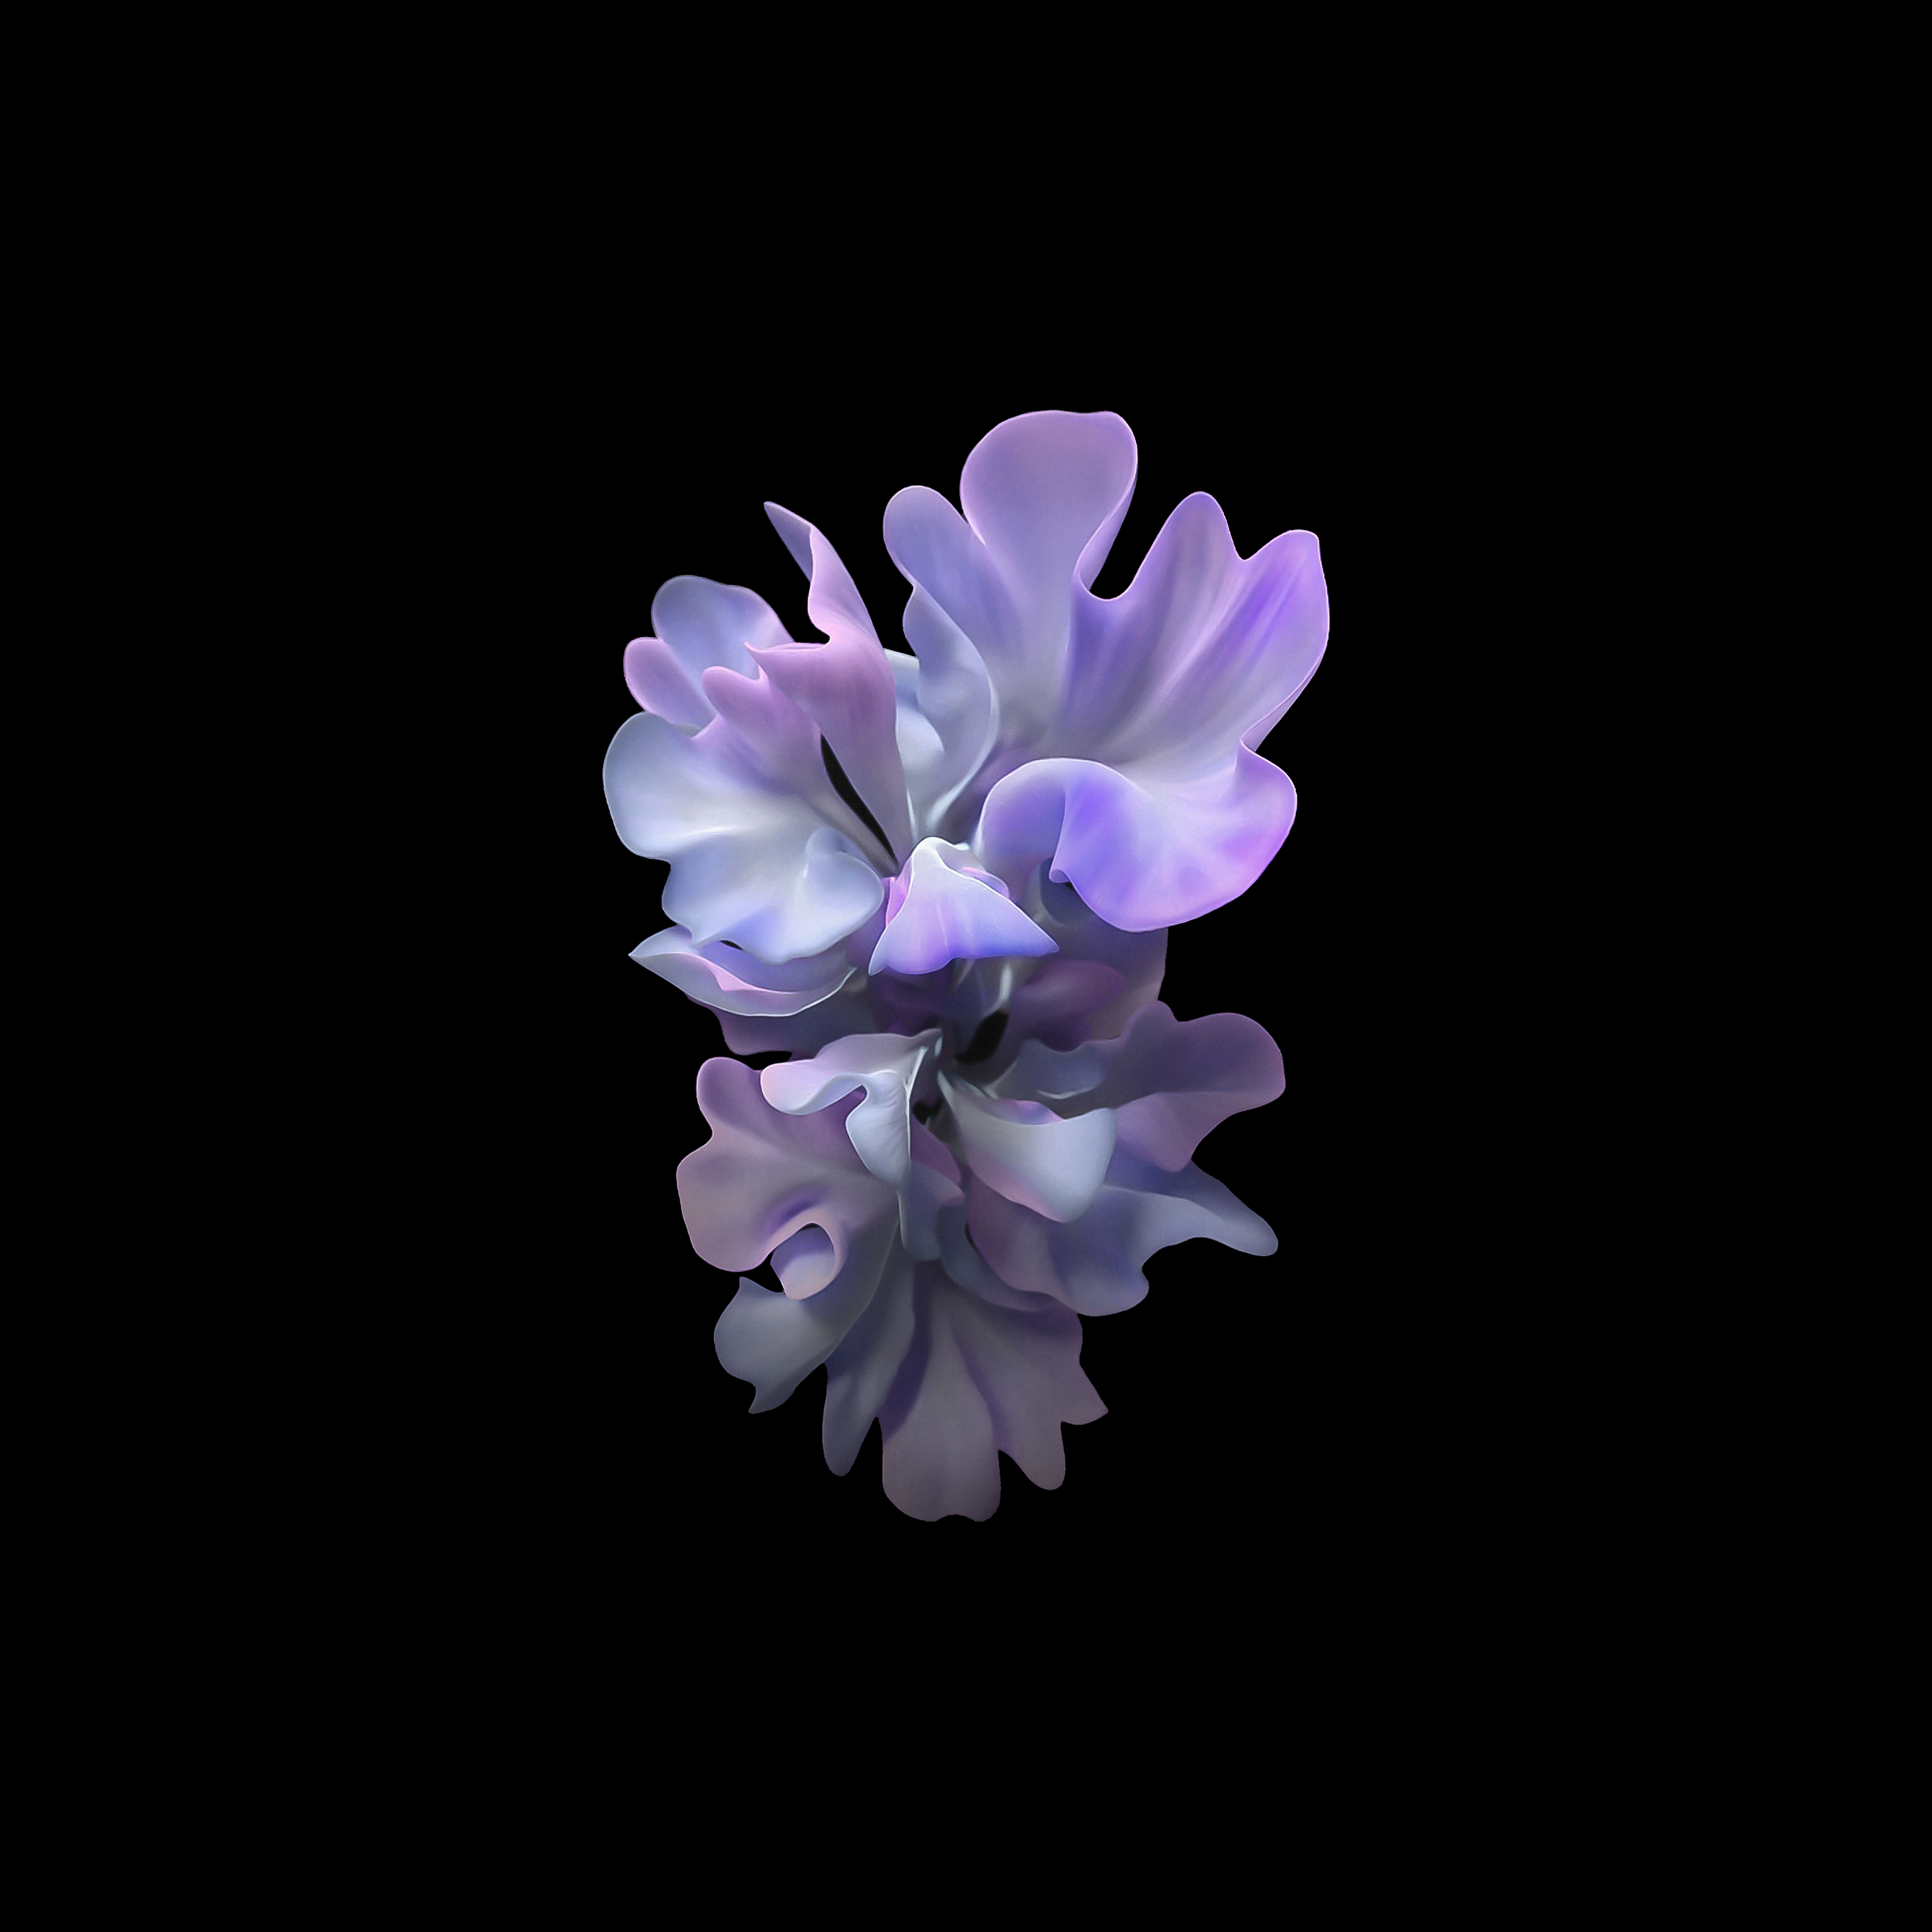 Download Galaxy Z Flip wallpapers and see your home screen 'bloom' -  SamMobile